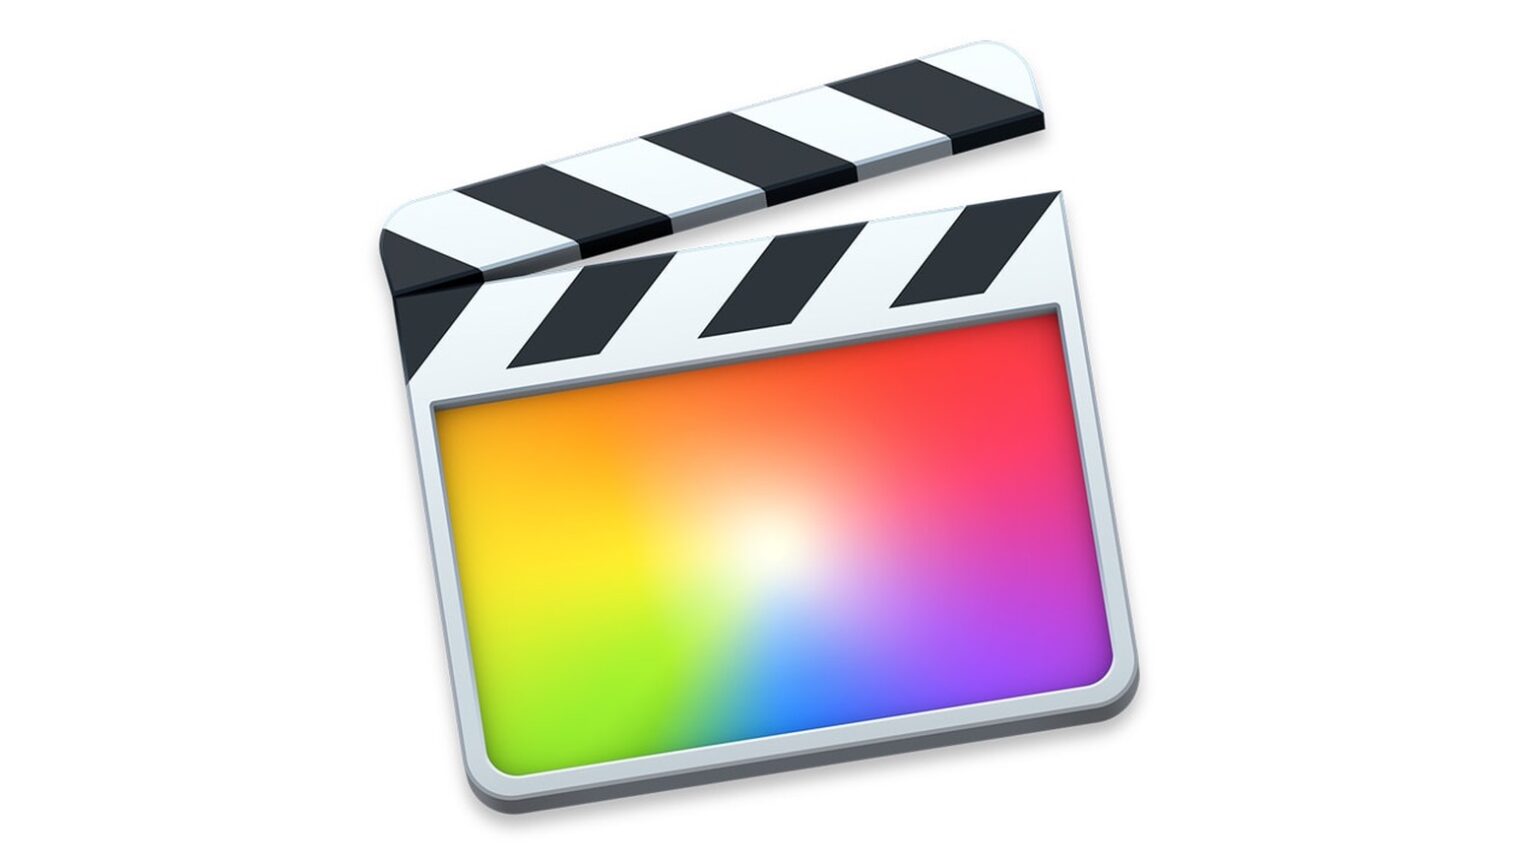 Many film and TV editors say Final Cut Pro is powerful and fun to use. So why can't it be a professional standard?